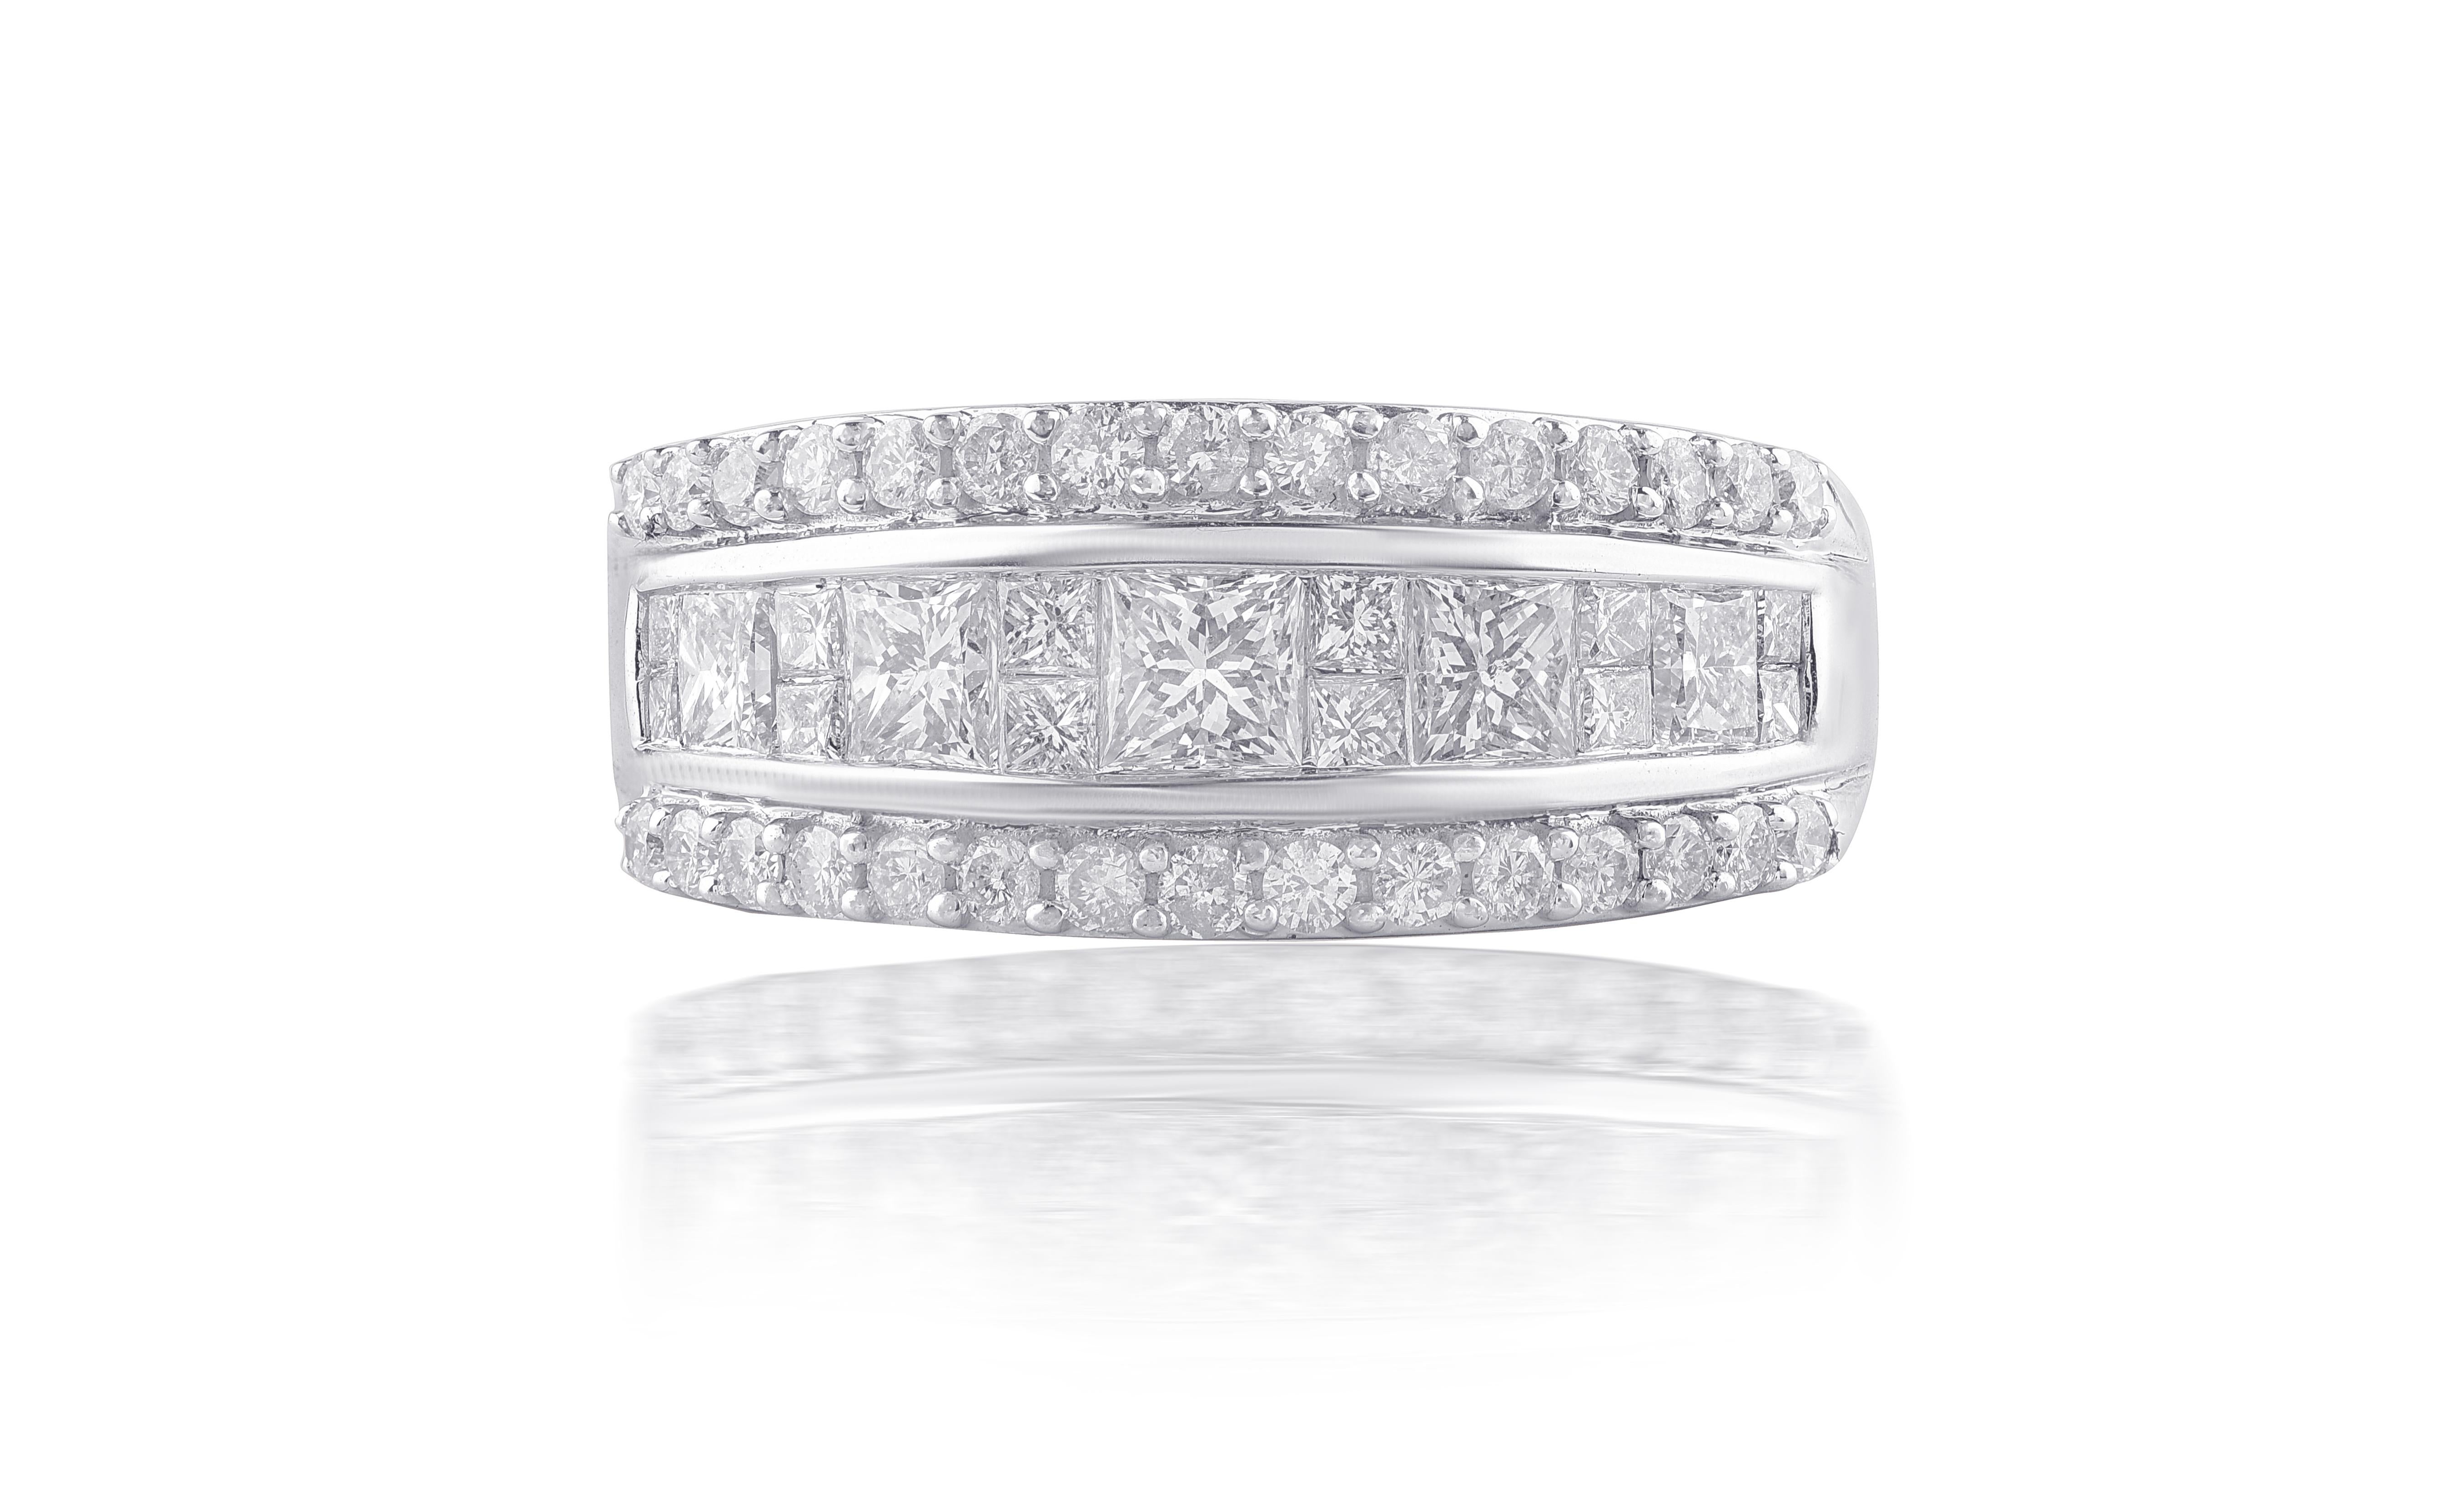 A timeless natural diamond ring crafted in 10 kt white gold. This eternity band is studded with 30 round and 17 princess cut diamonds in prong and channel setting and it comes along with an authentication certificate. Diamonds are graded H-I Color,